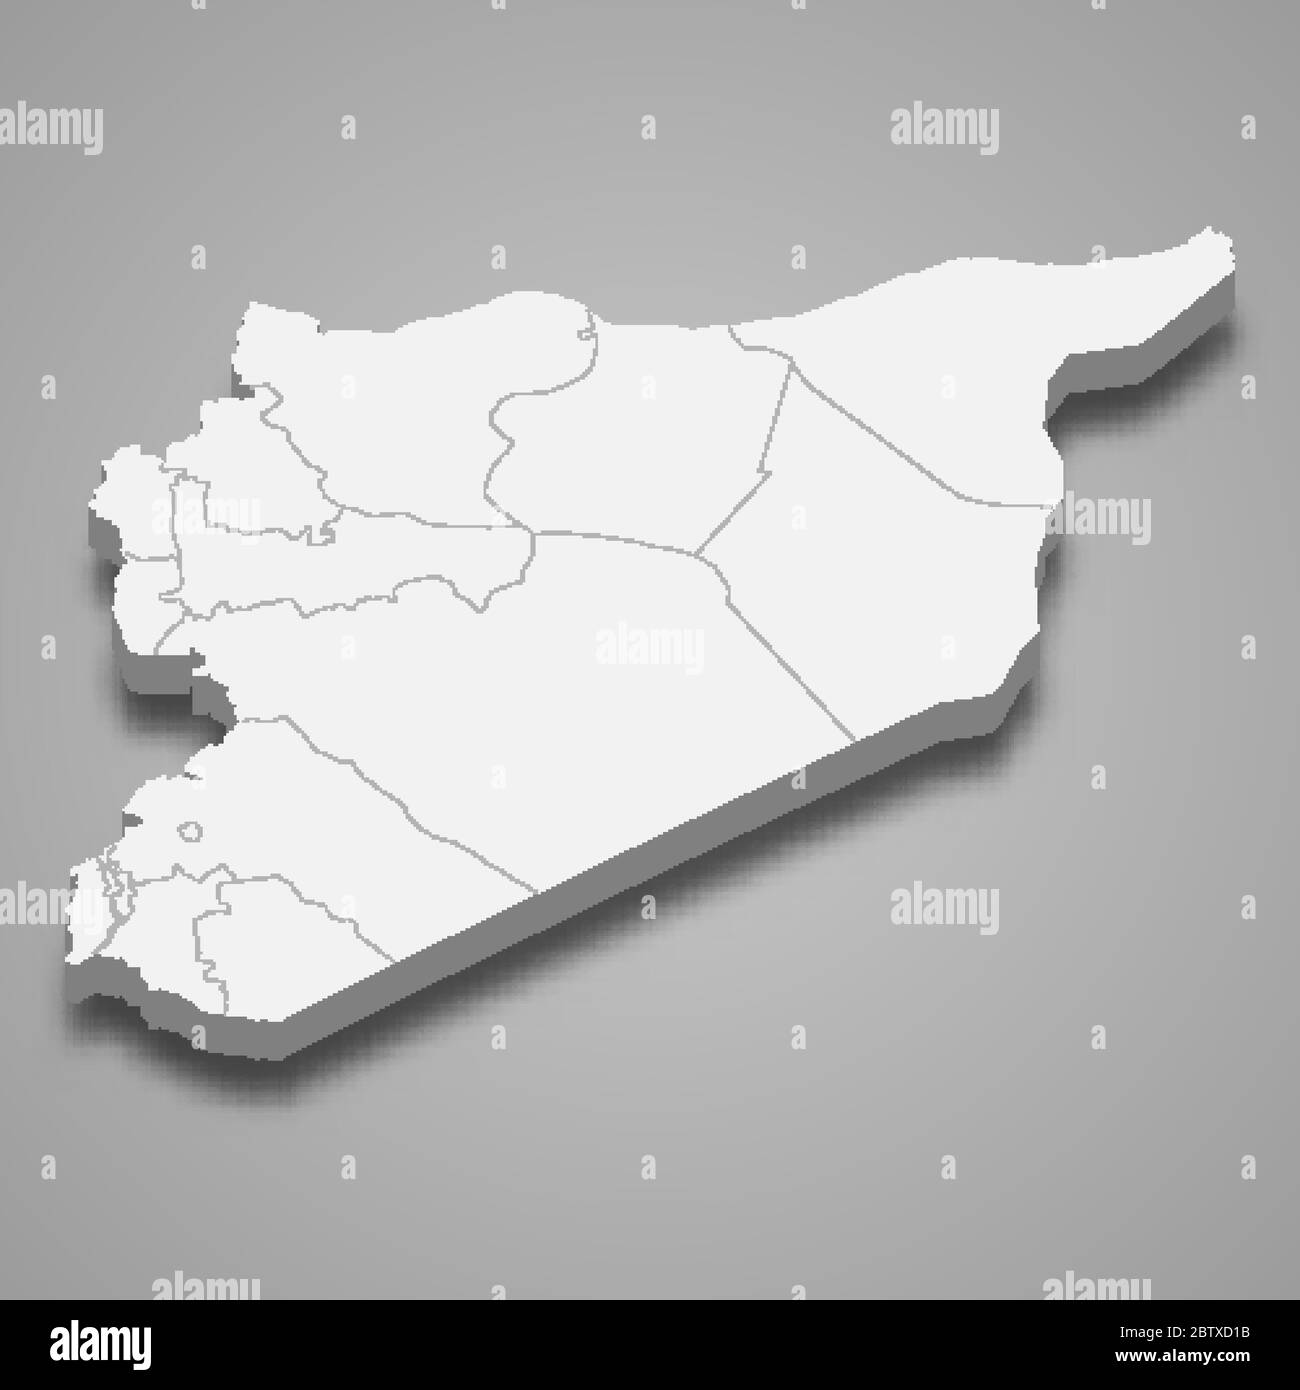 3d map of Syria with borders of regions Stock Vector